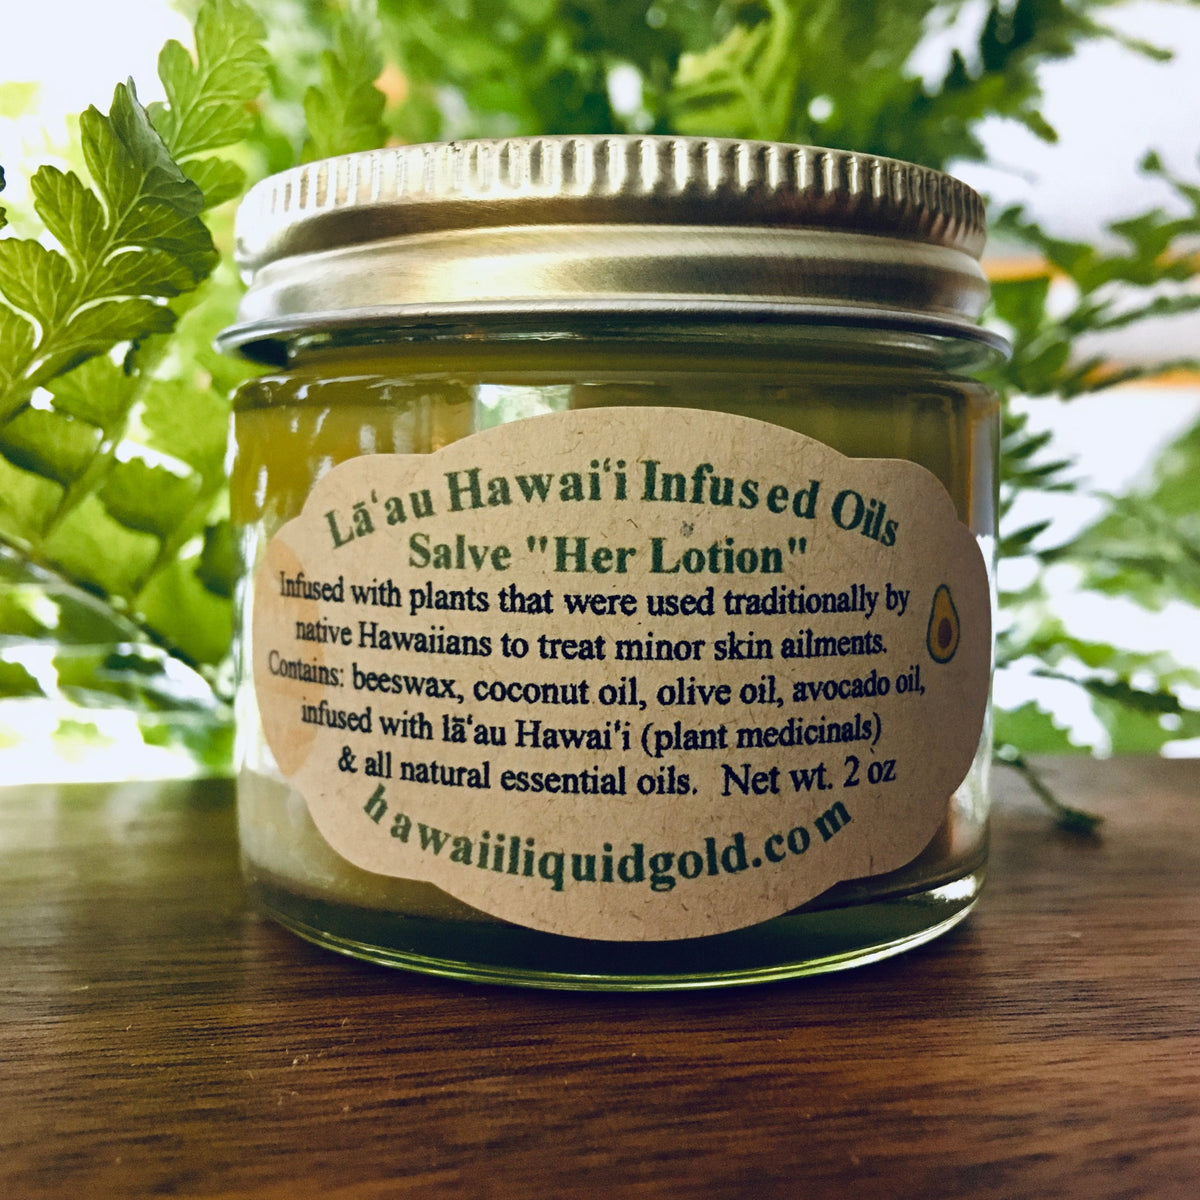 Her Lotion - Our original breakout product!